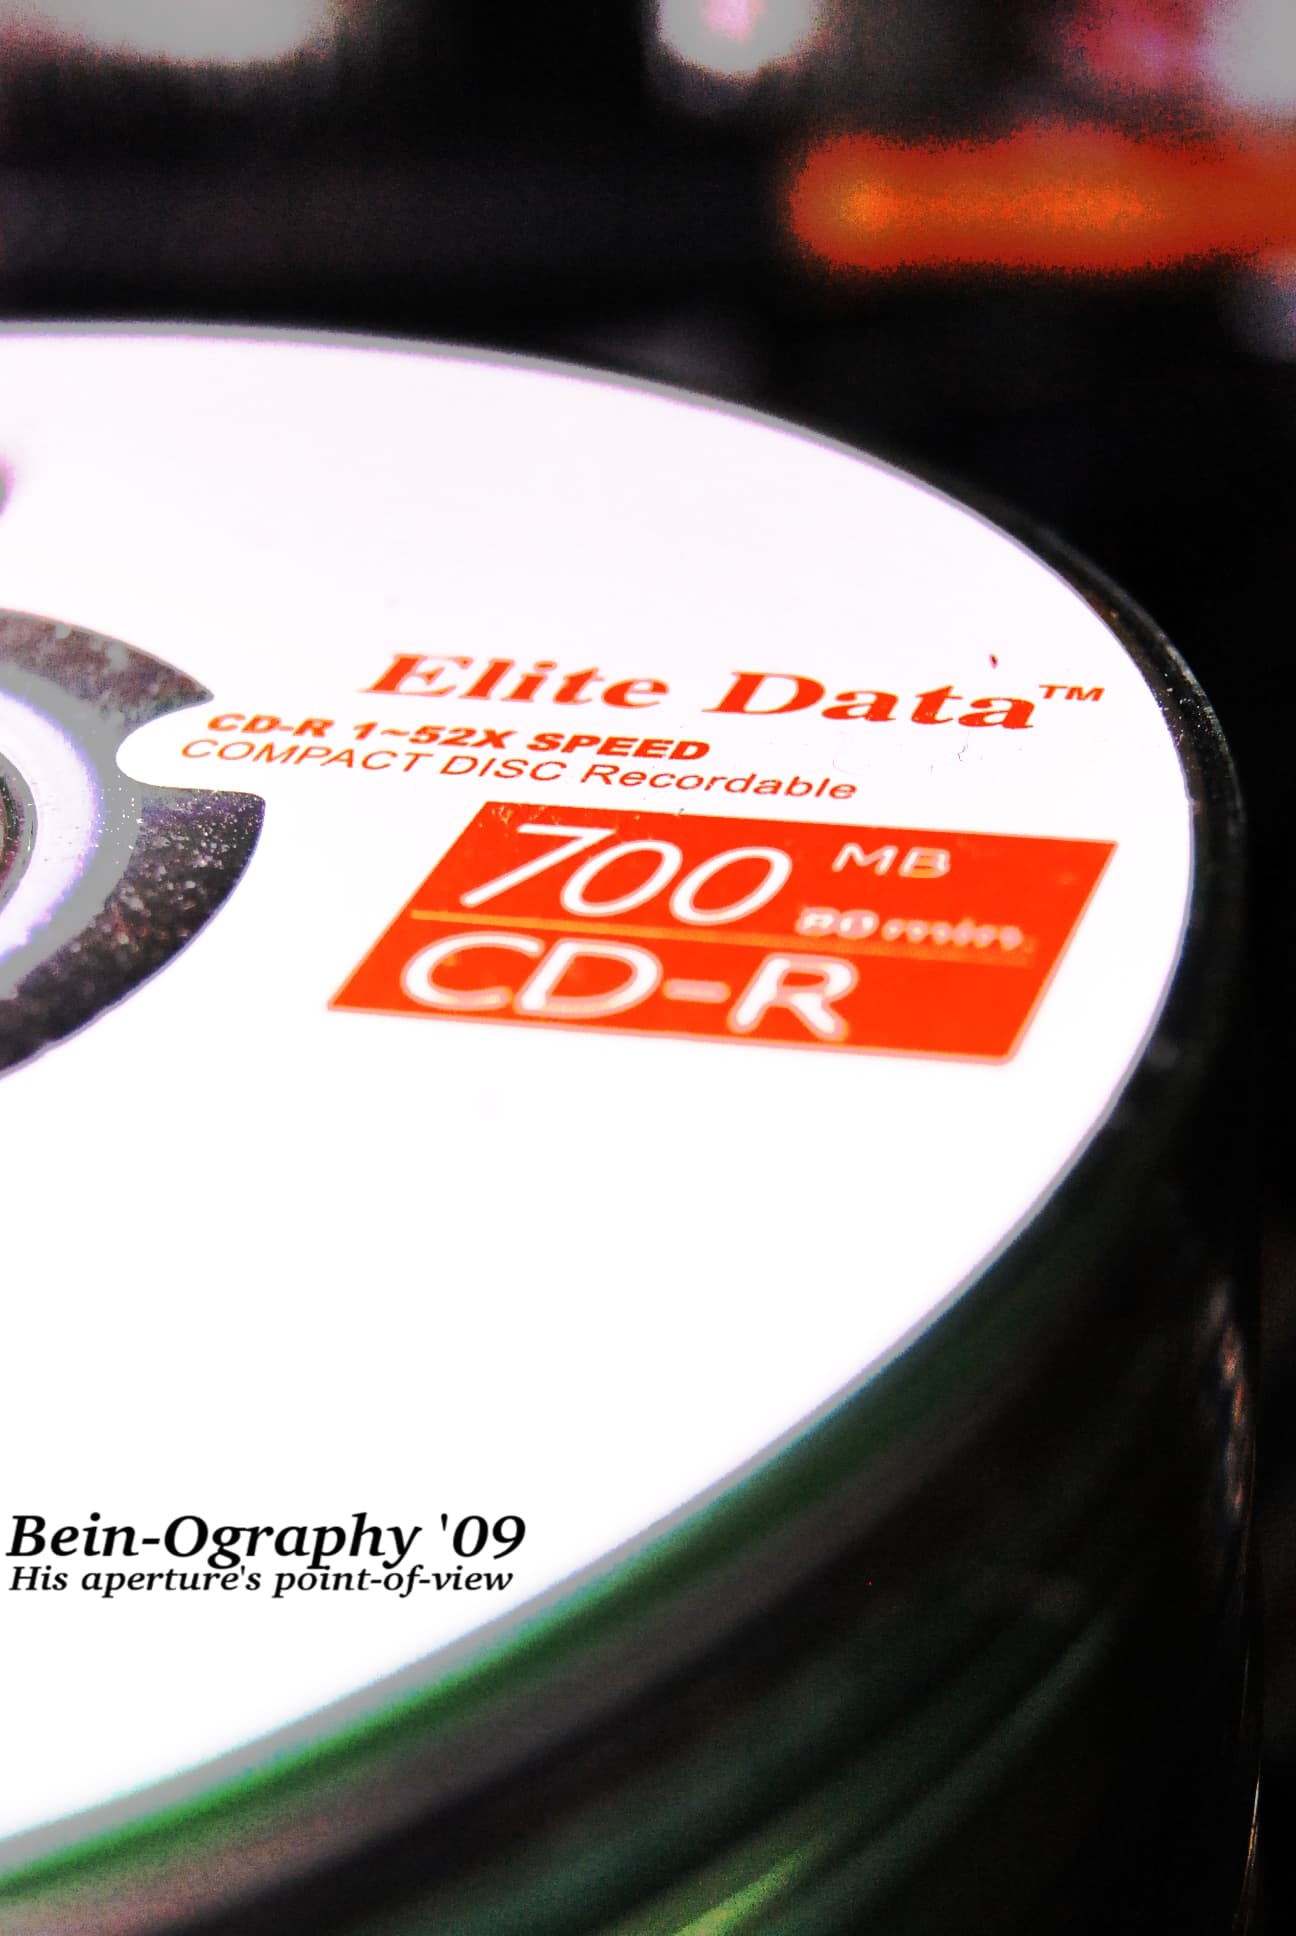 A portion of the CD with "Elite Data" and other information written